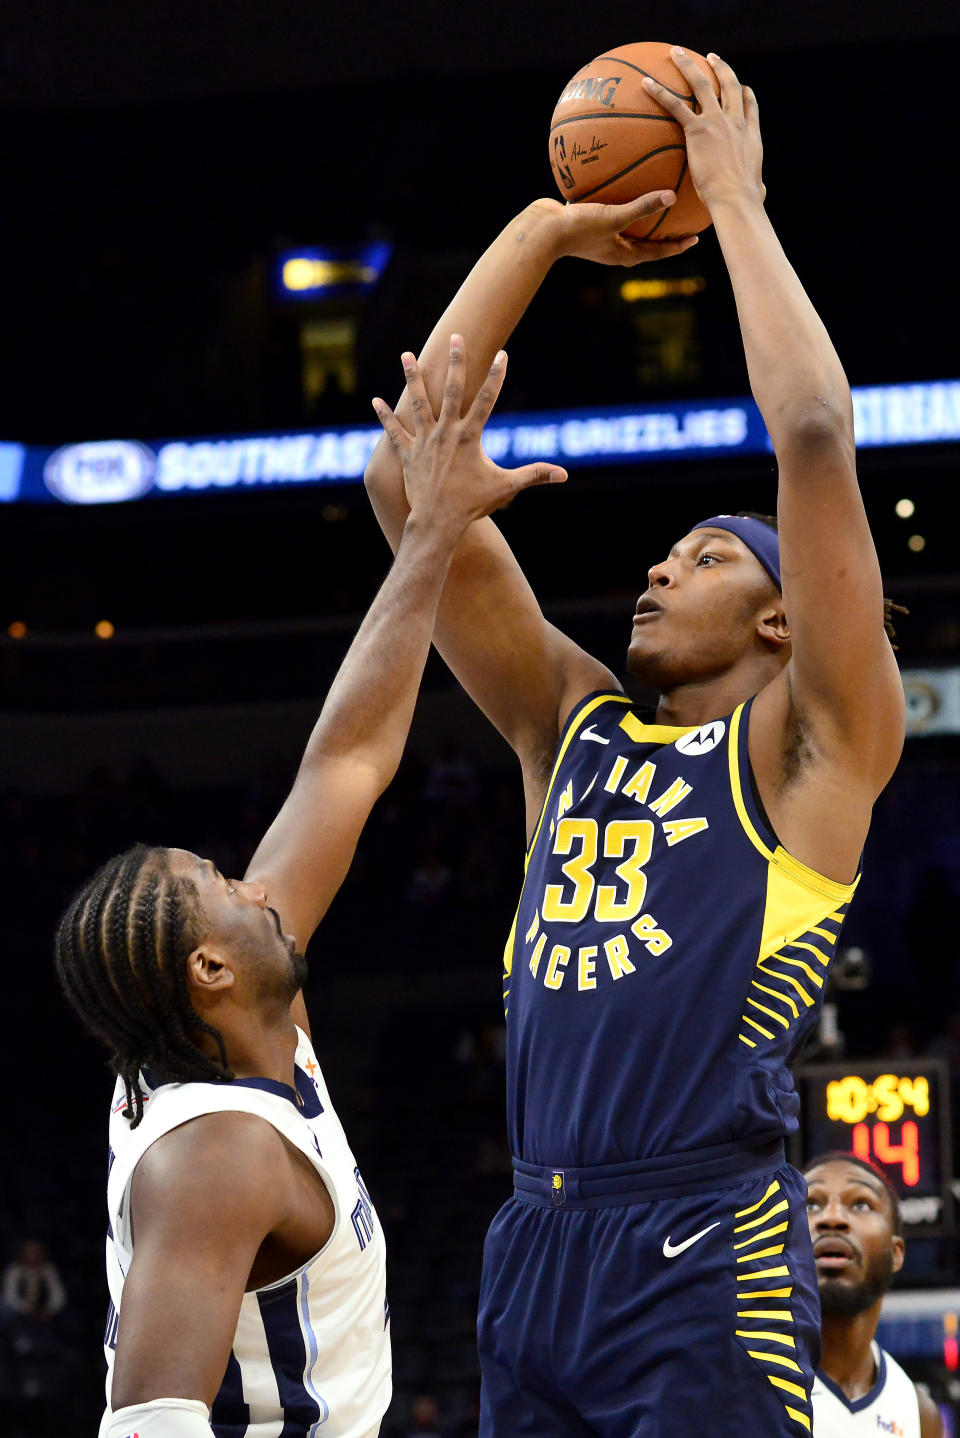 Indiana Pacers center Myles Turner (33) shoots against Memphis Grizzlies forward Solomon Hill, left, in the first half of an NBA basketball game Monday, Dec. 2, 2019, in Memphis, Tenn. (AP Photo/Brandon Dill)